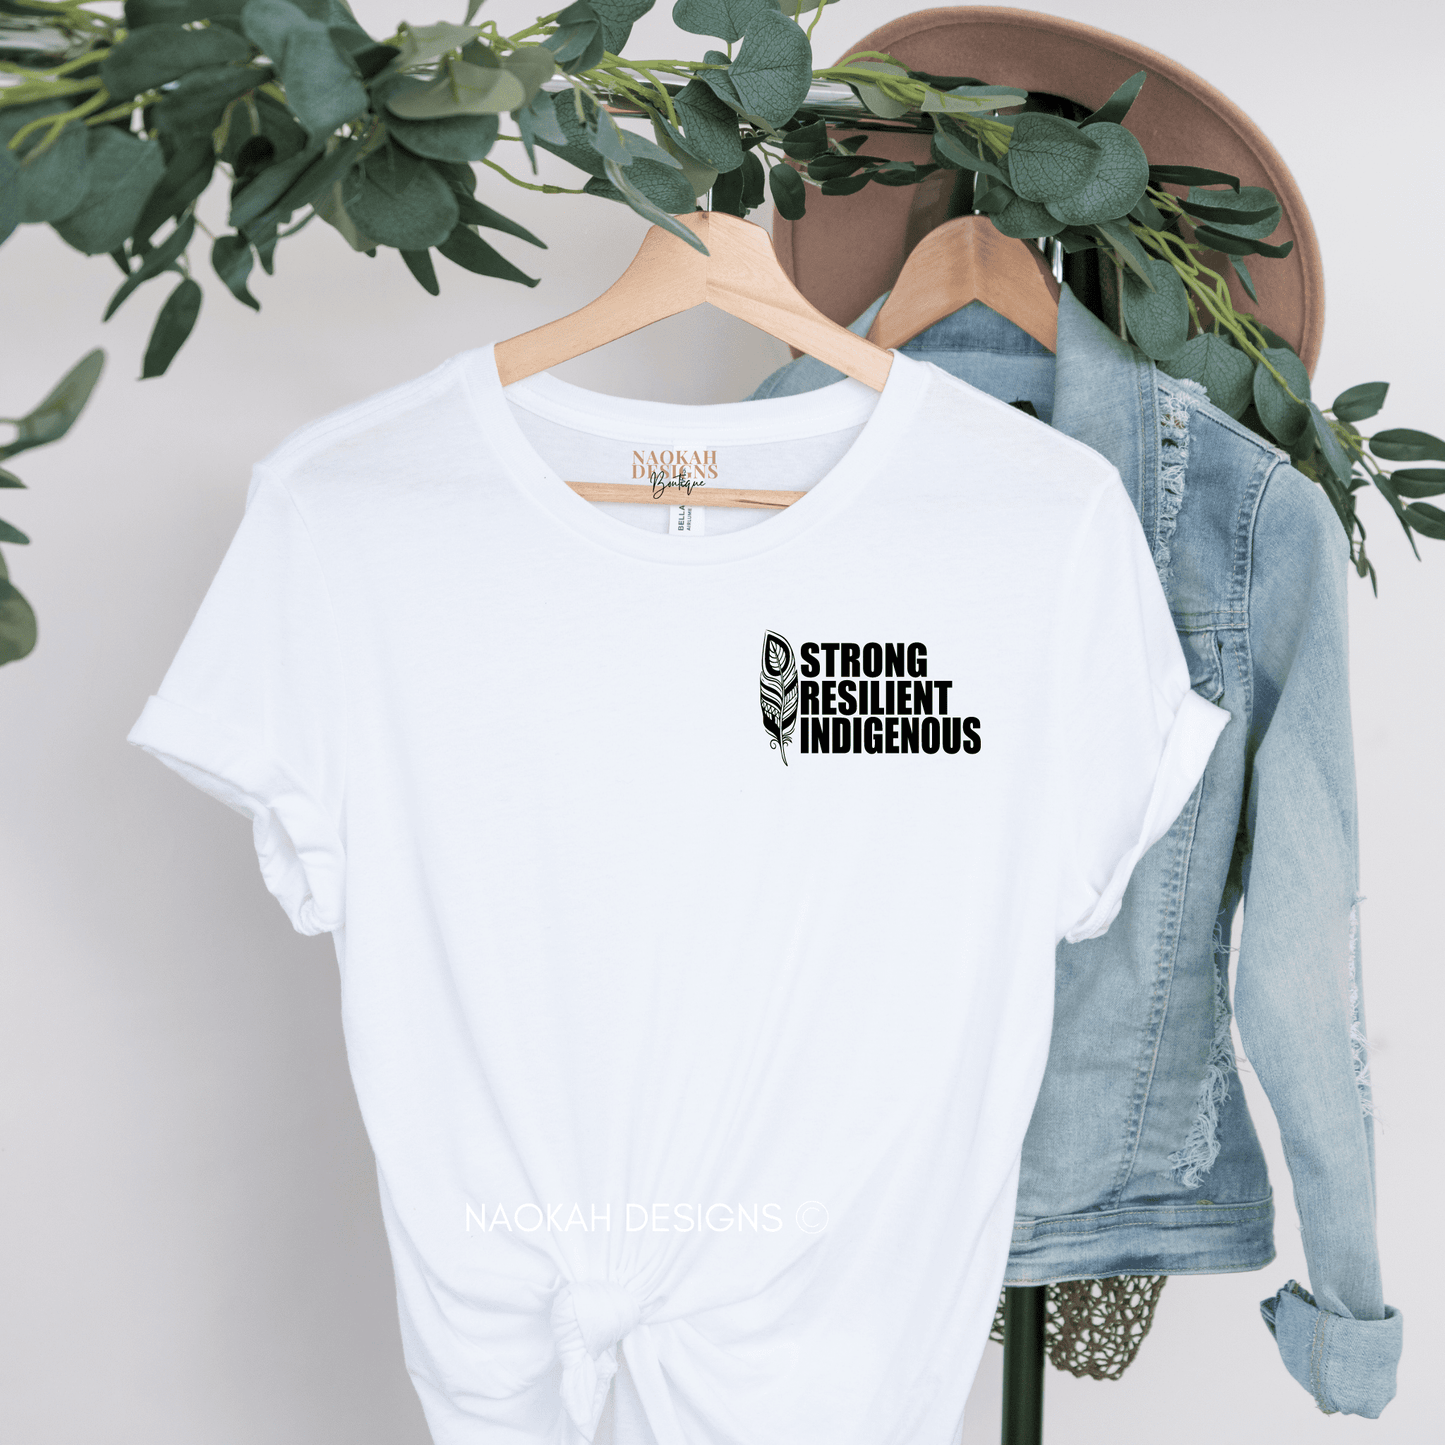 Strong Resilient Indigenous Shirt, Native Pride, Indigenous Owned Shop, Indigenous shirt, Indigenous Peoples Day, Awareness Tshirt